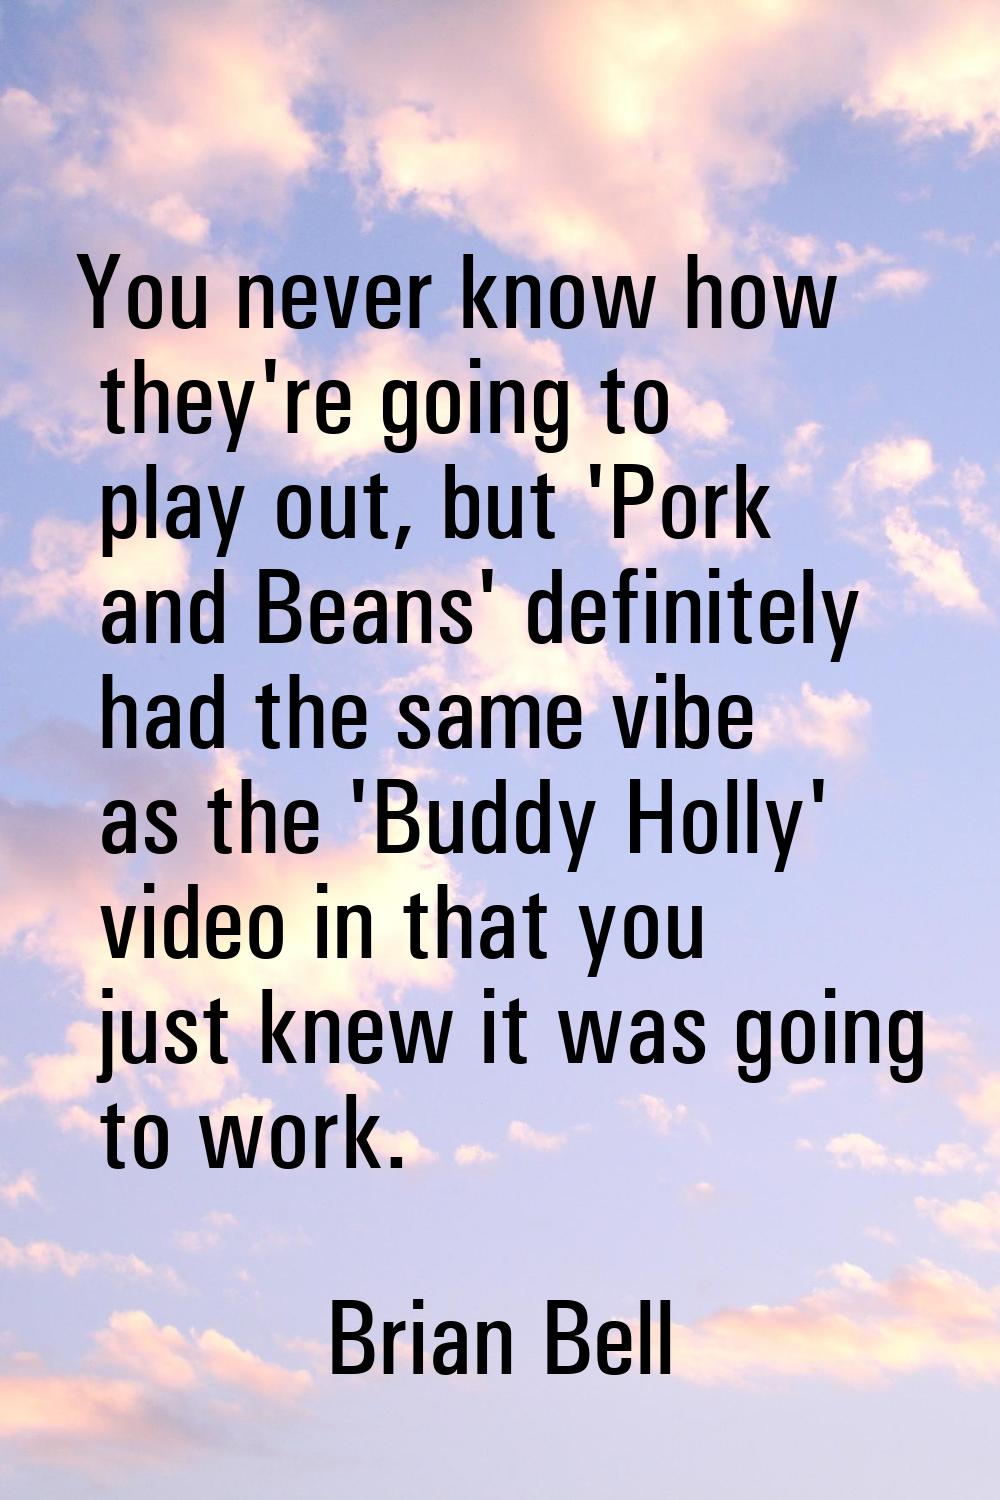 You never know how they're going to play out, but 'Pork and Beans' definitely had the same vibe as 